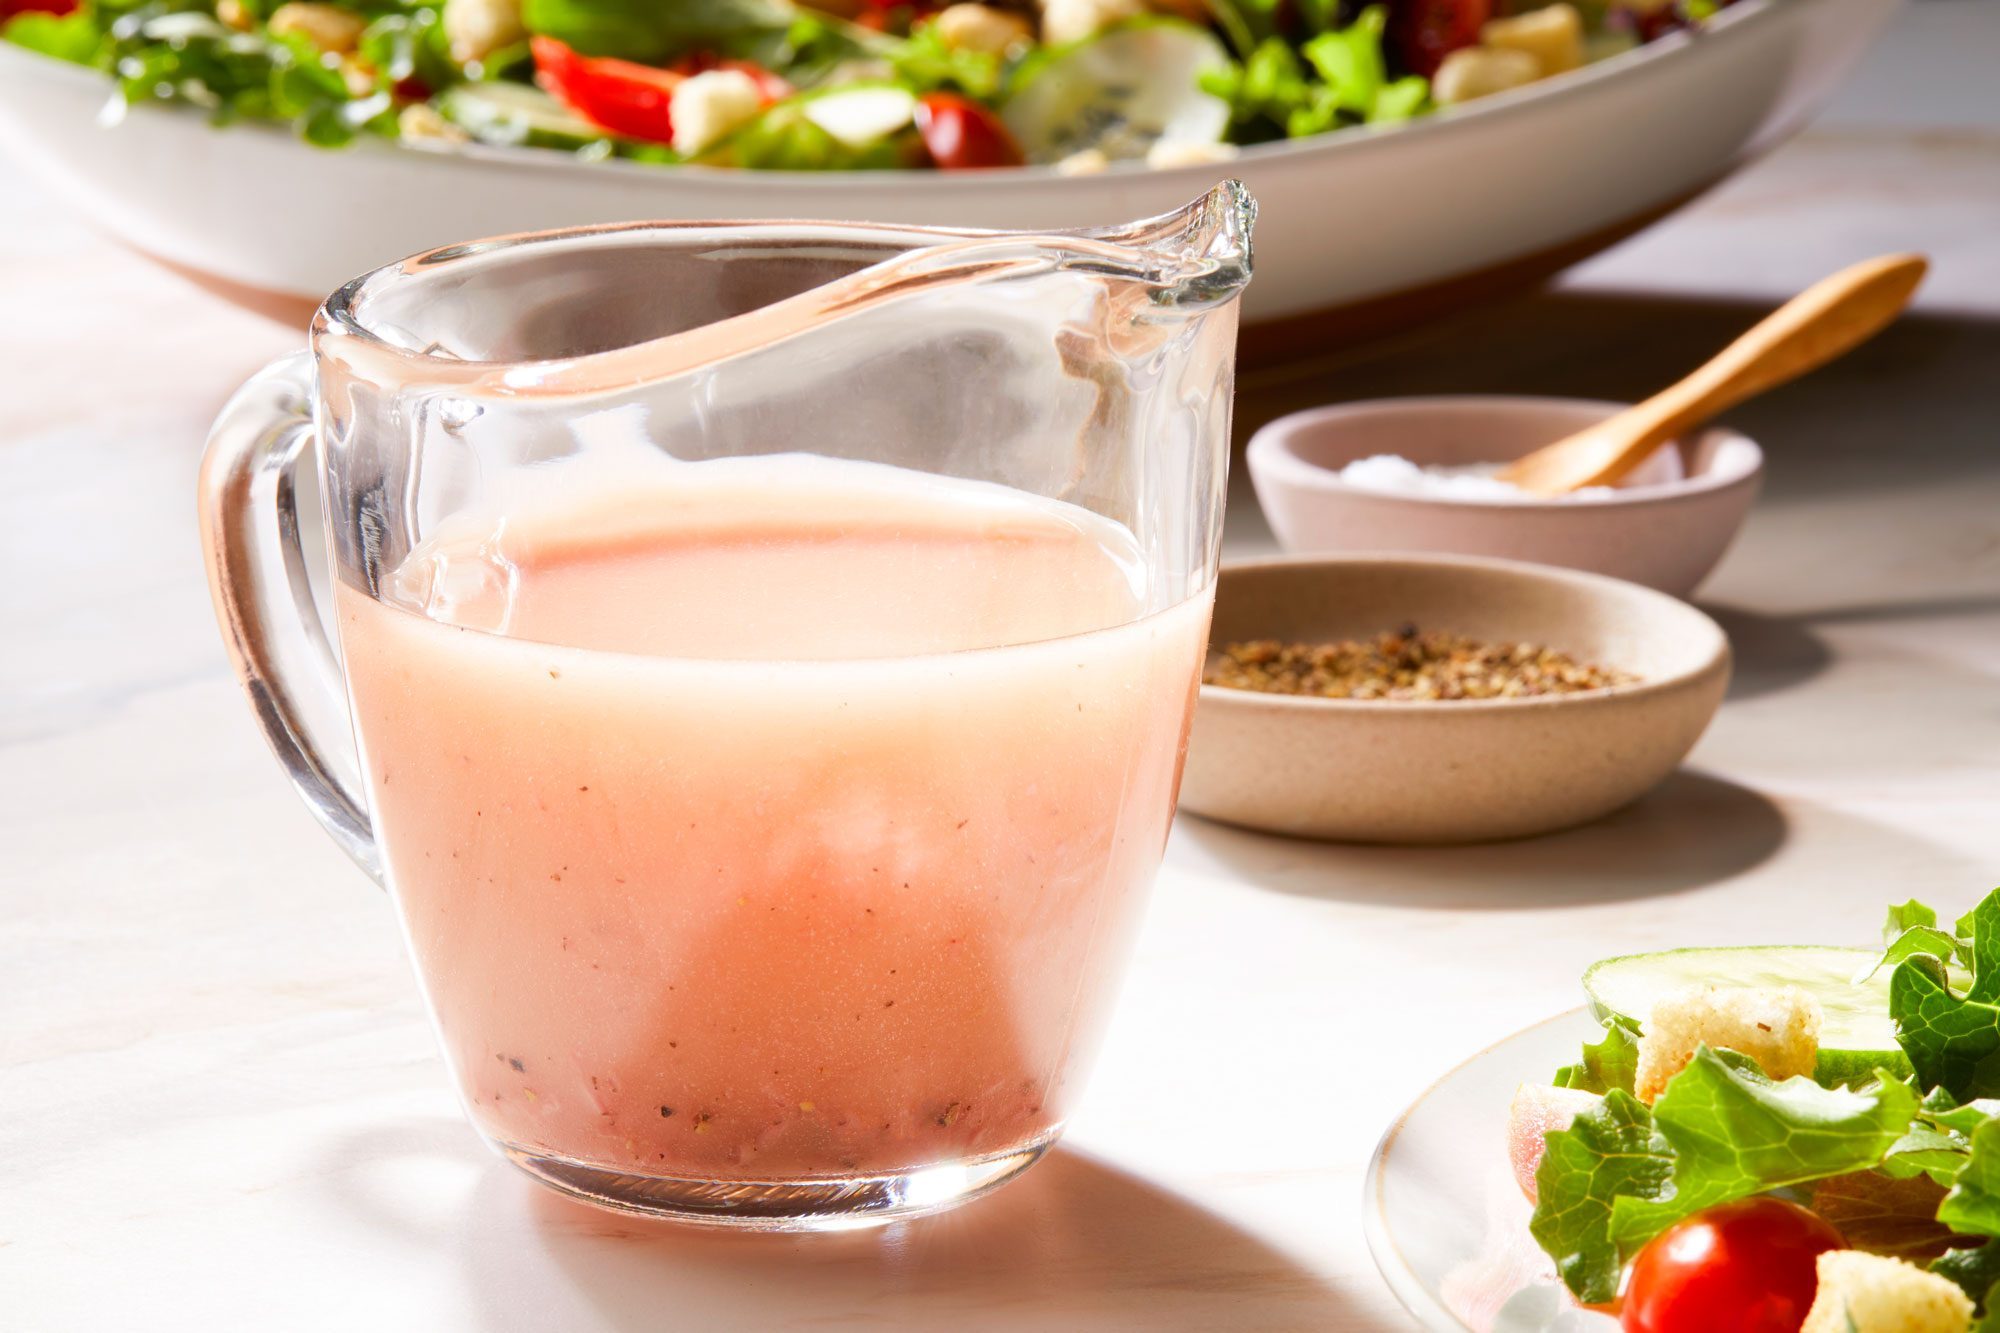 Red Wine Vinaigrette in a cup served with green salad